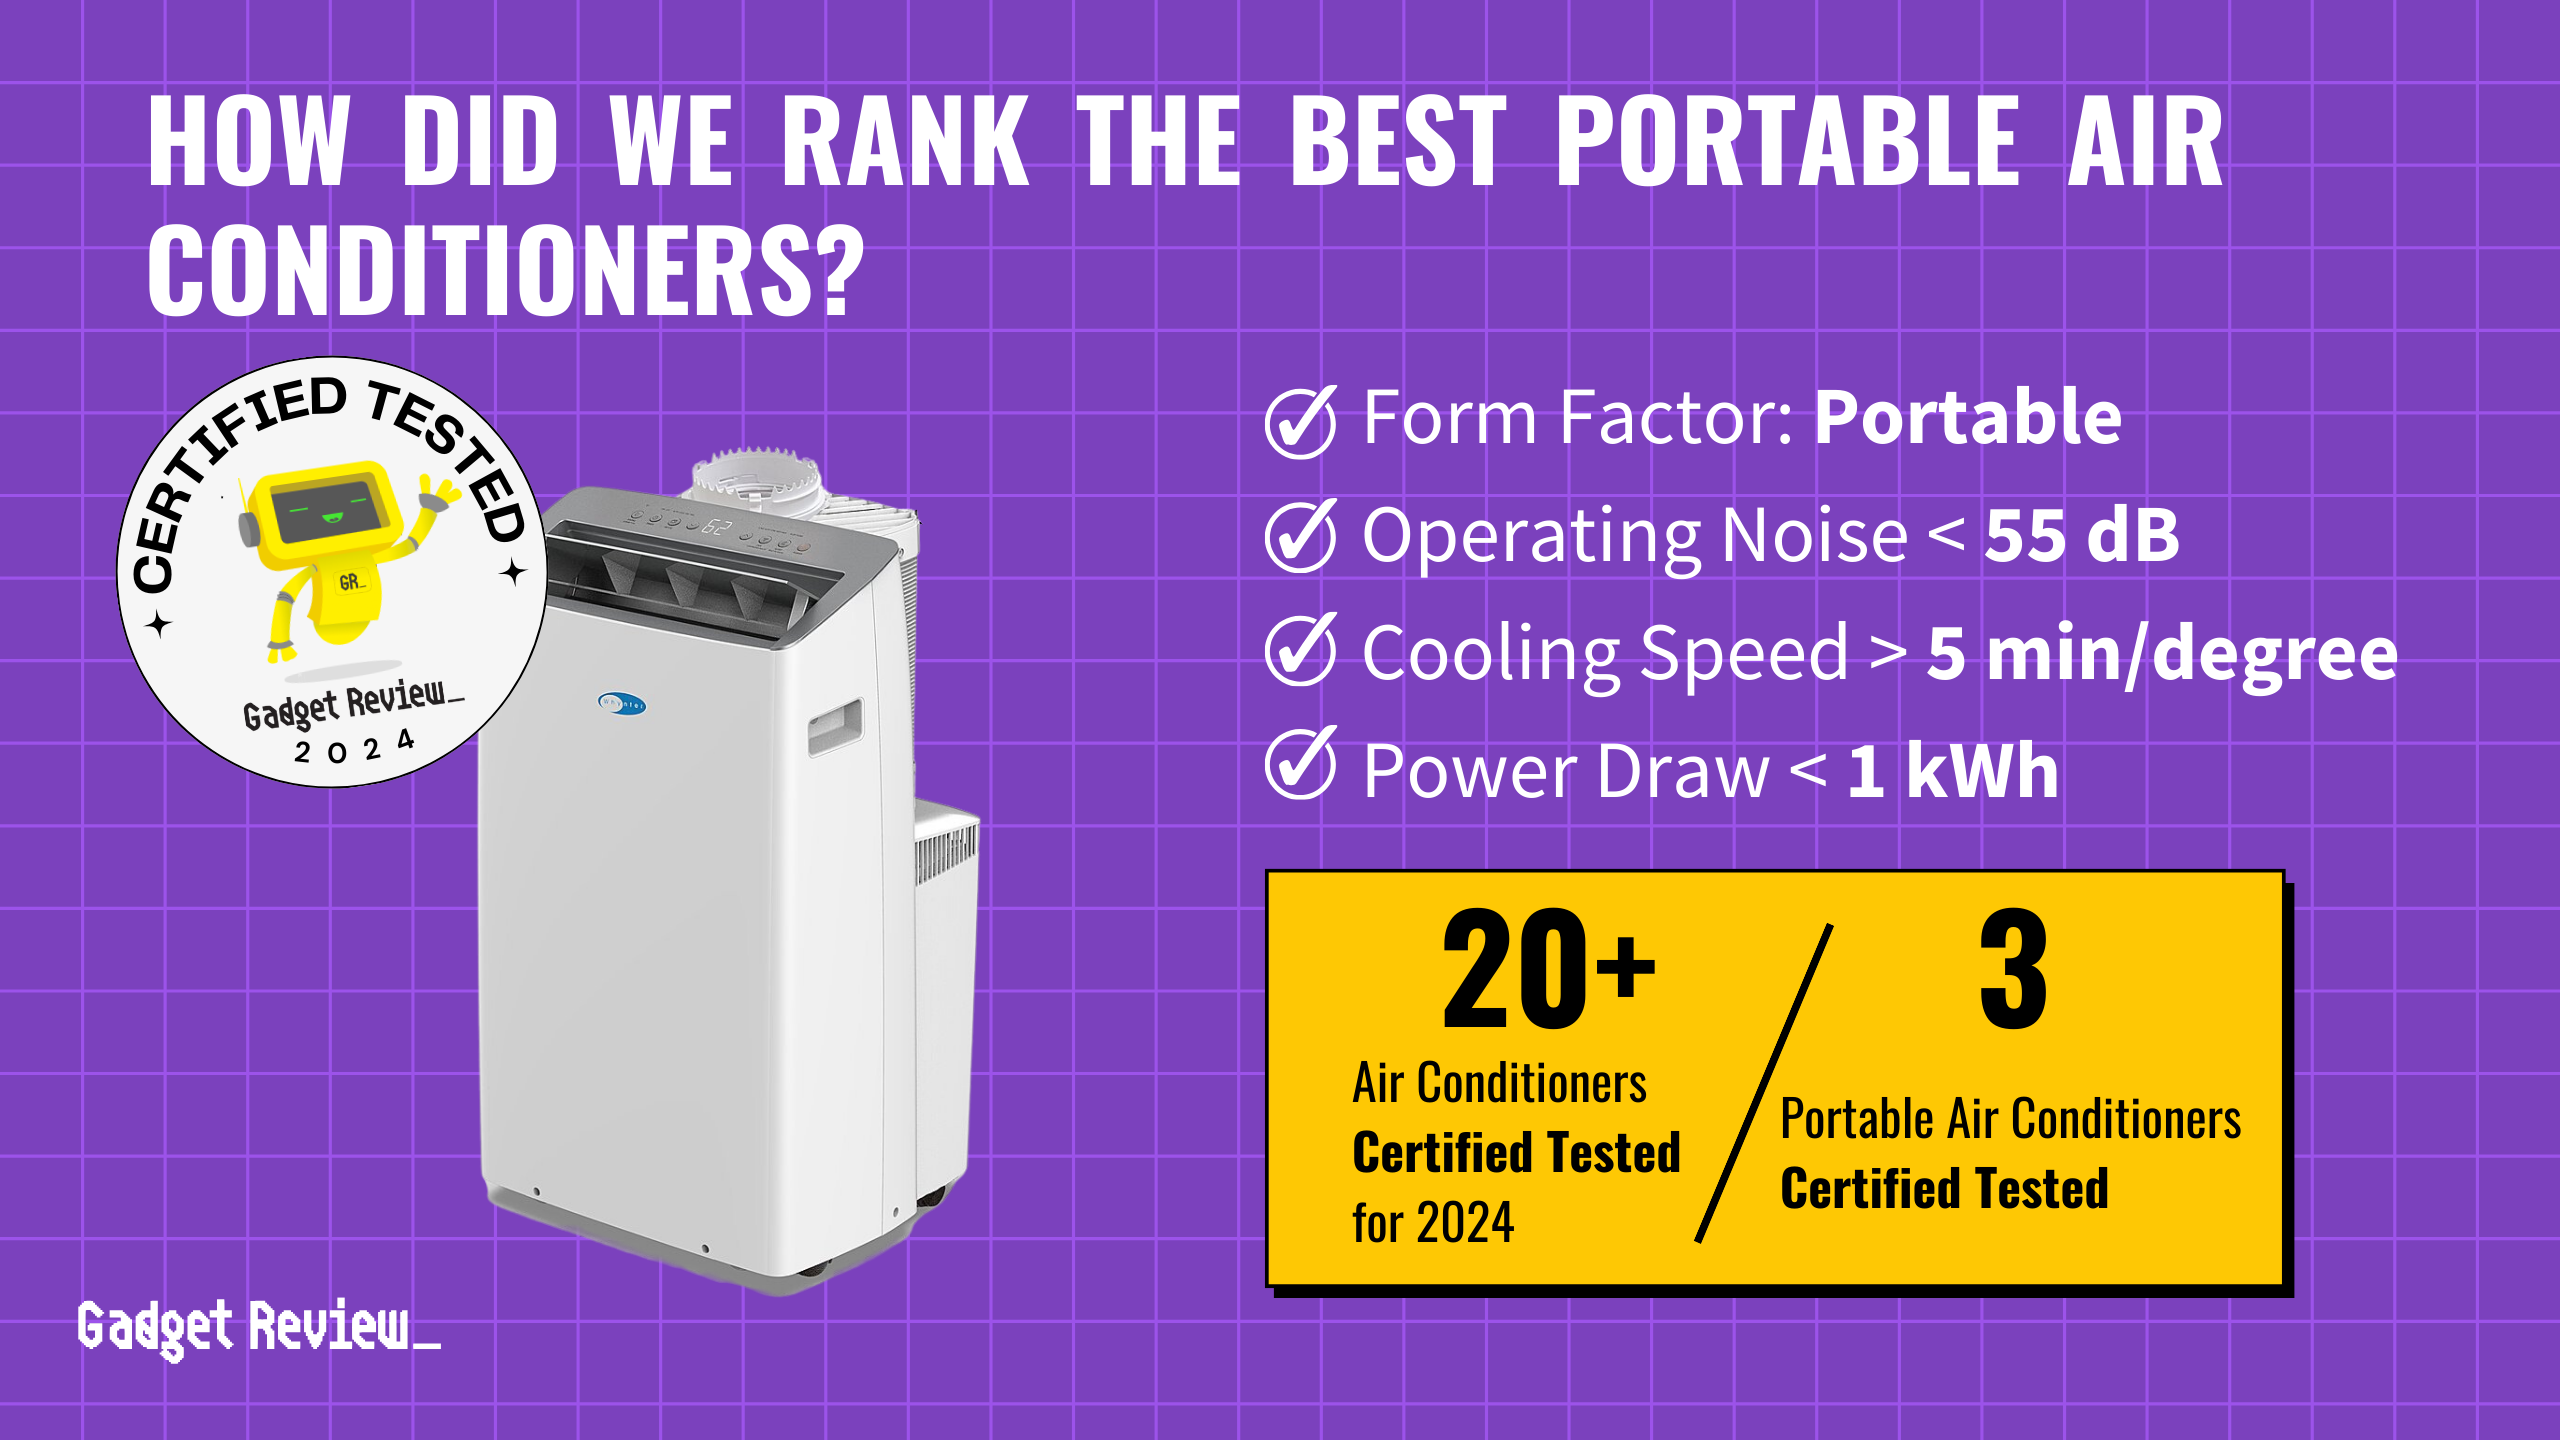 How We Ranked the 3 Best Portable Air Conditioners